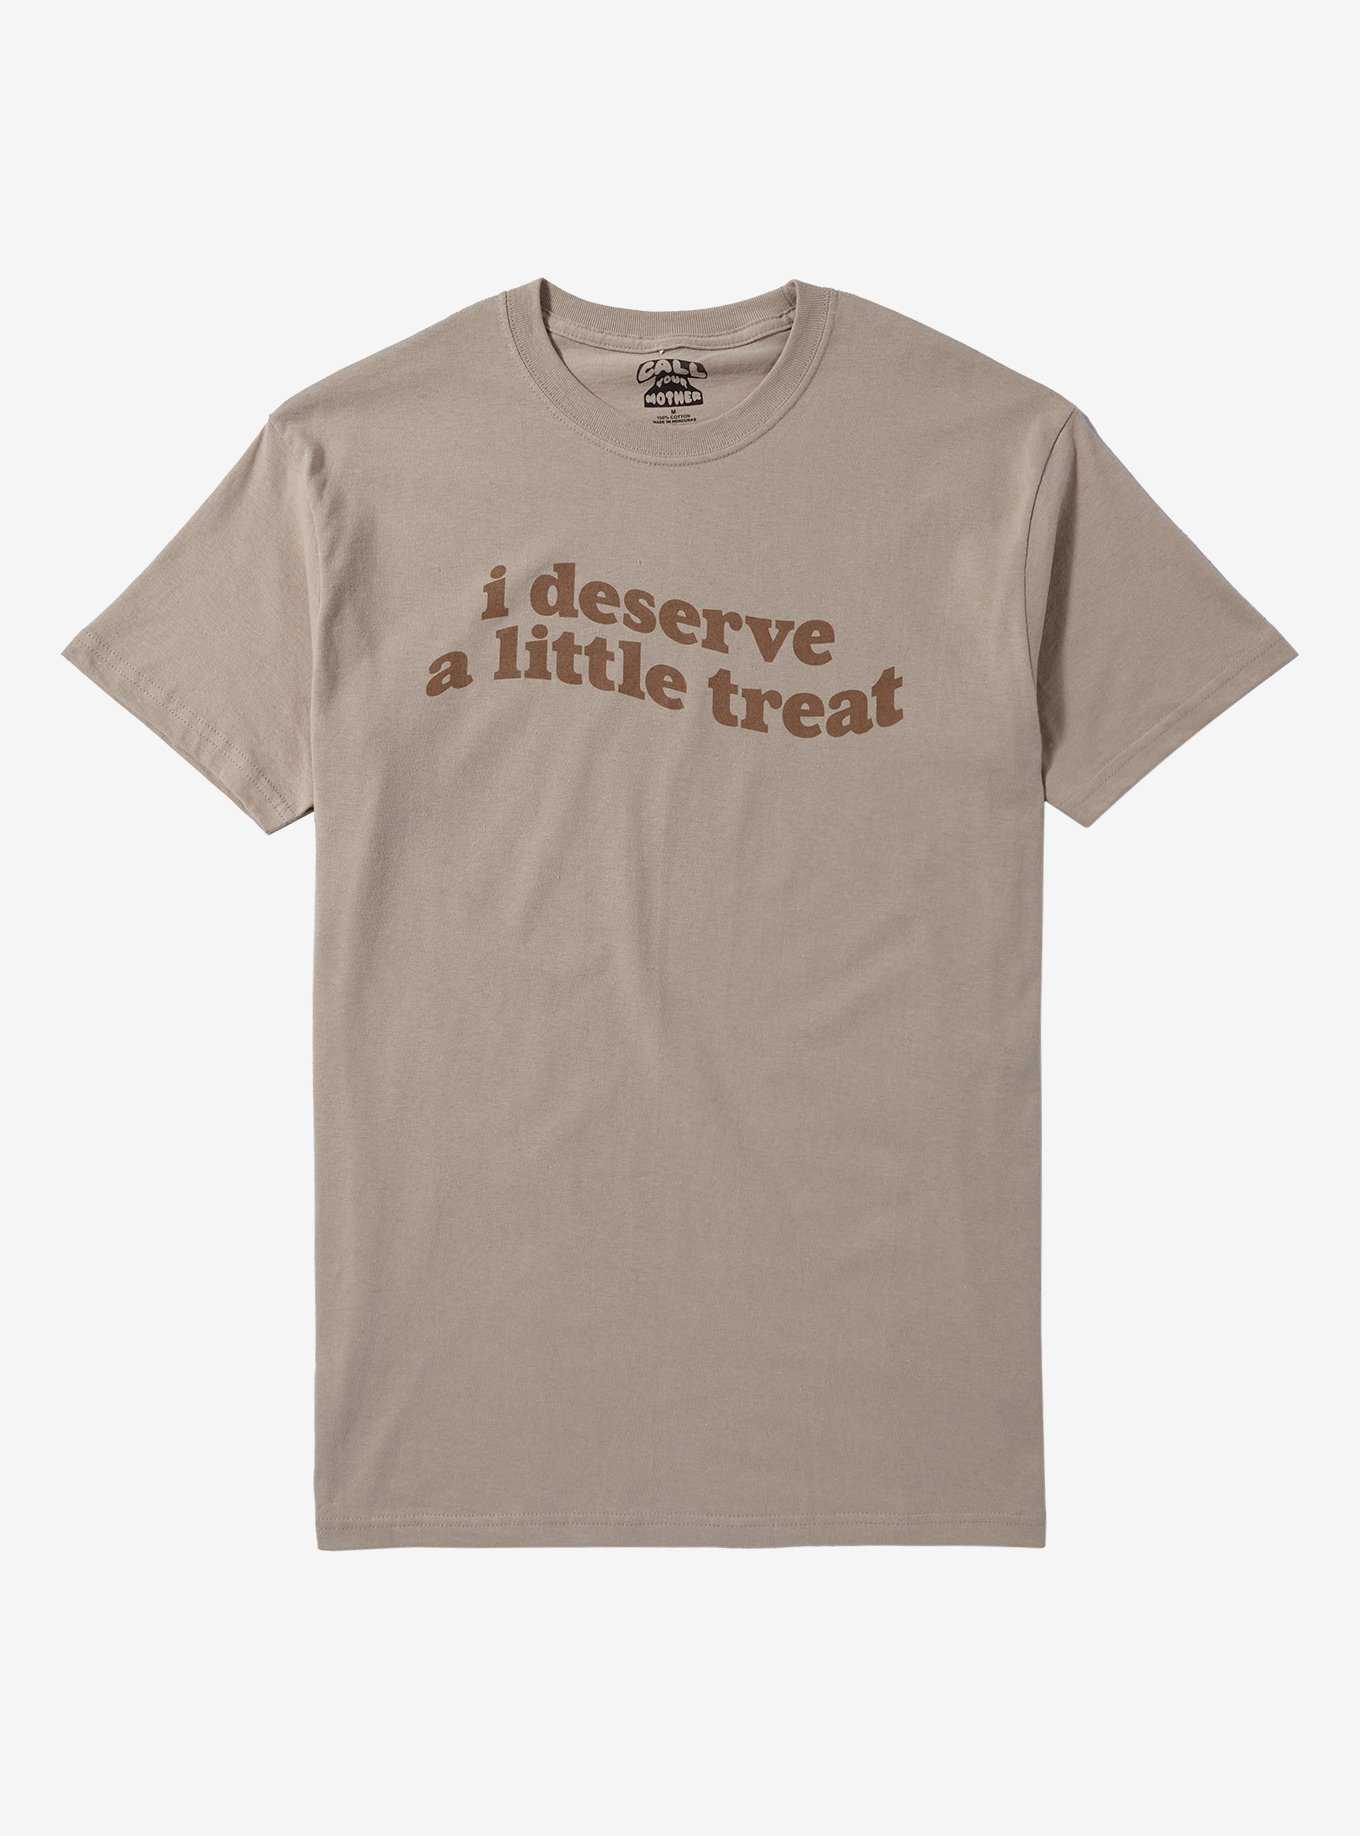 A Little Treat T-Shirt By Call Your Mother, , hi-res